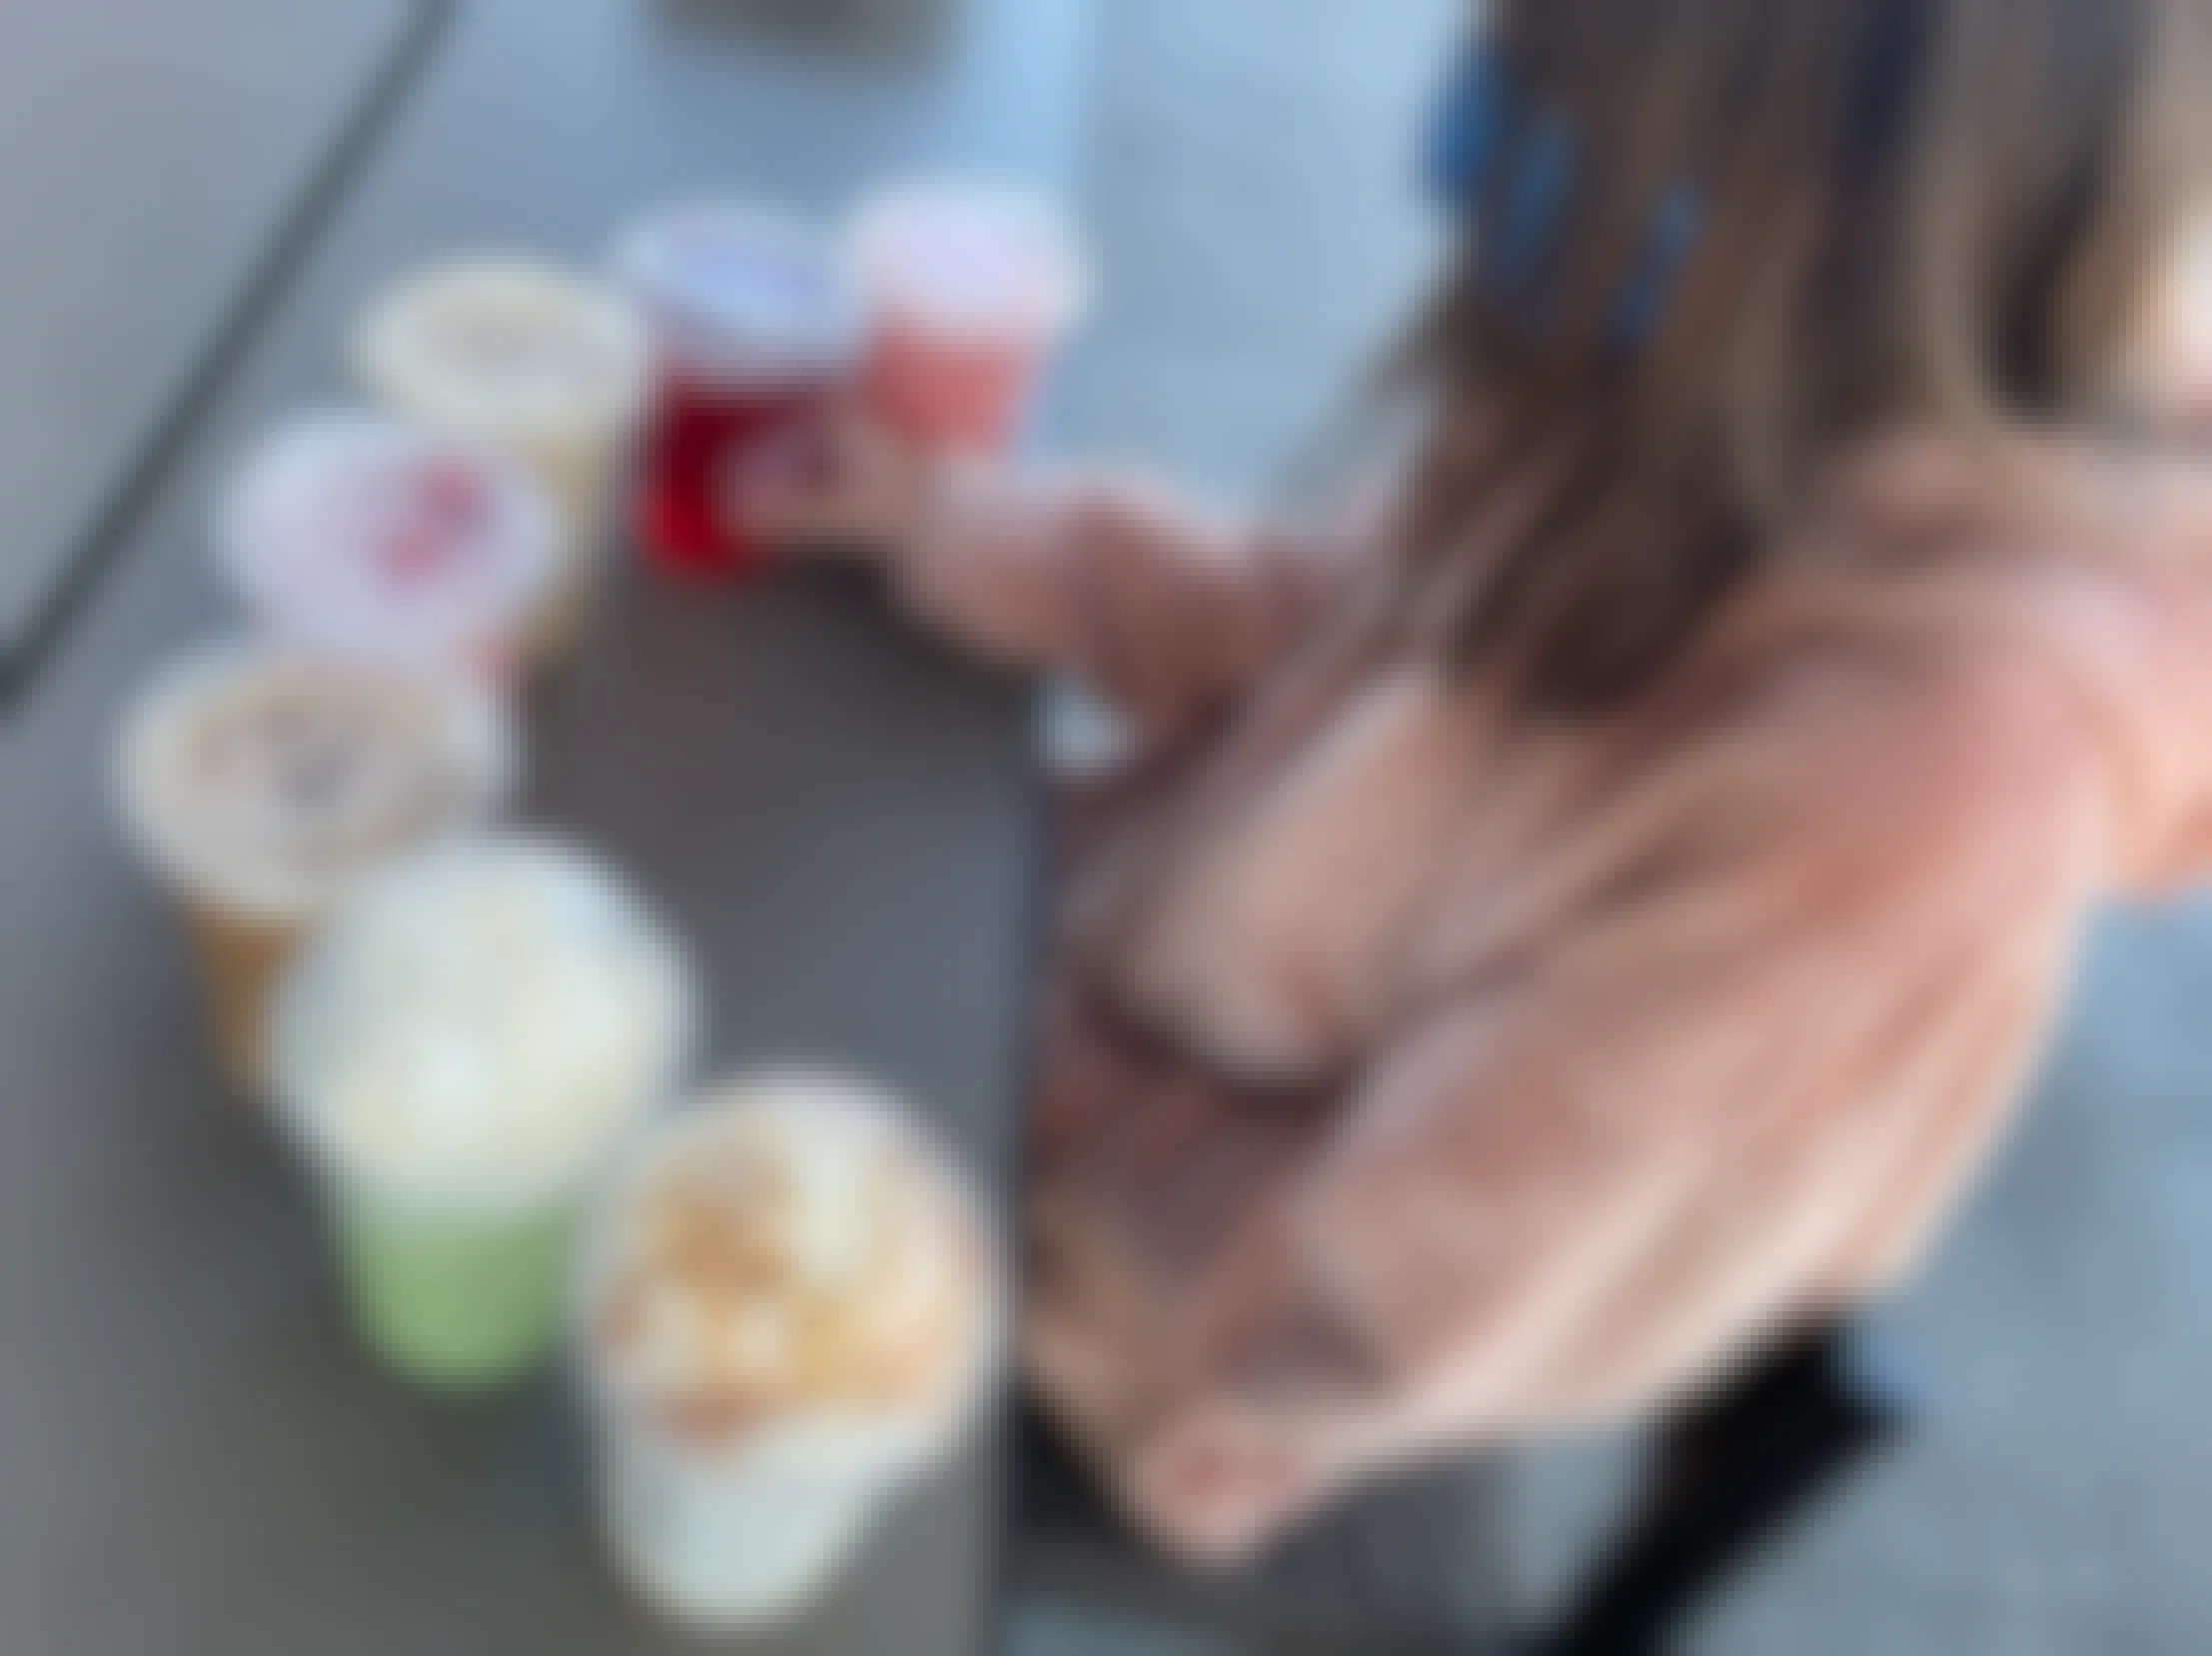 A young girl sitting at a table with a row of Starbucks secret menu drinks in front of her.